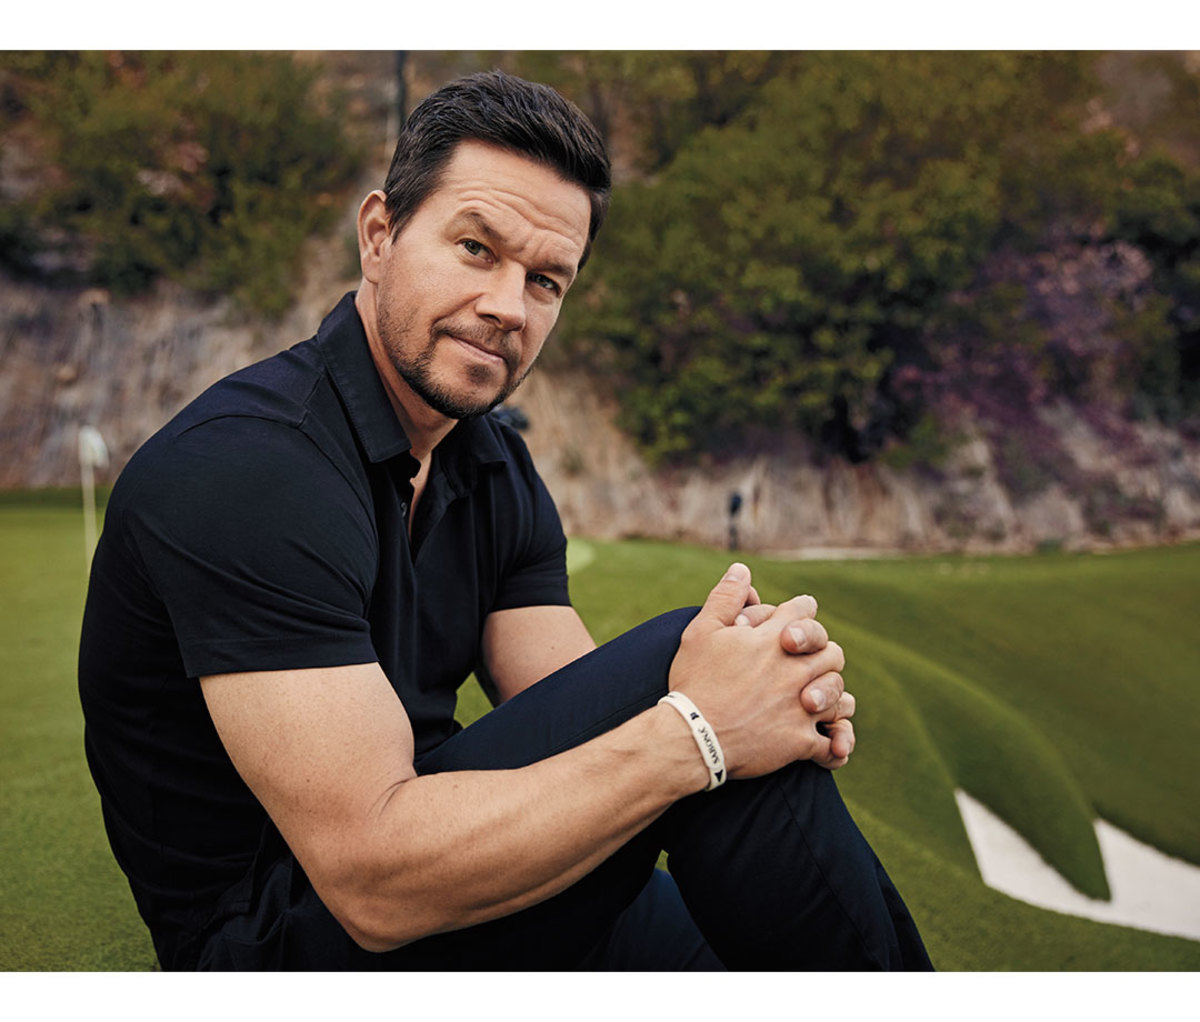 Actor Mark Wahlberg poses on golf course